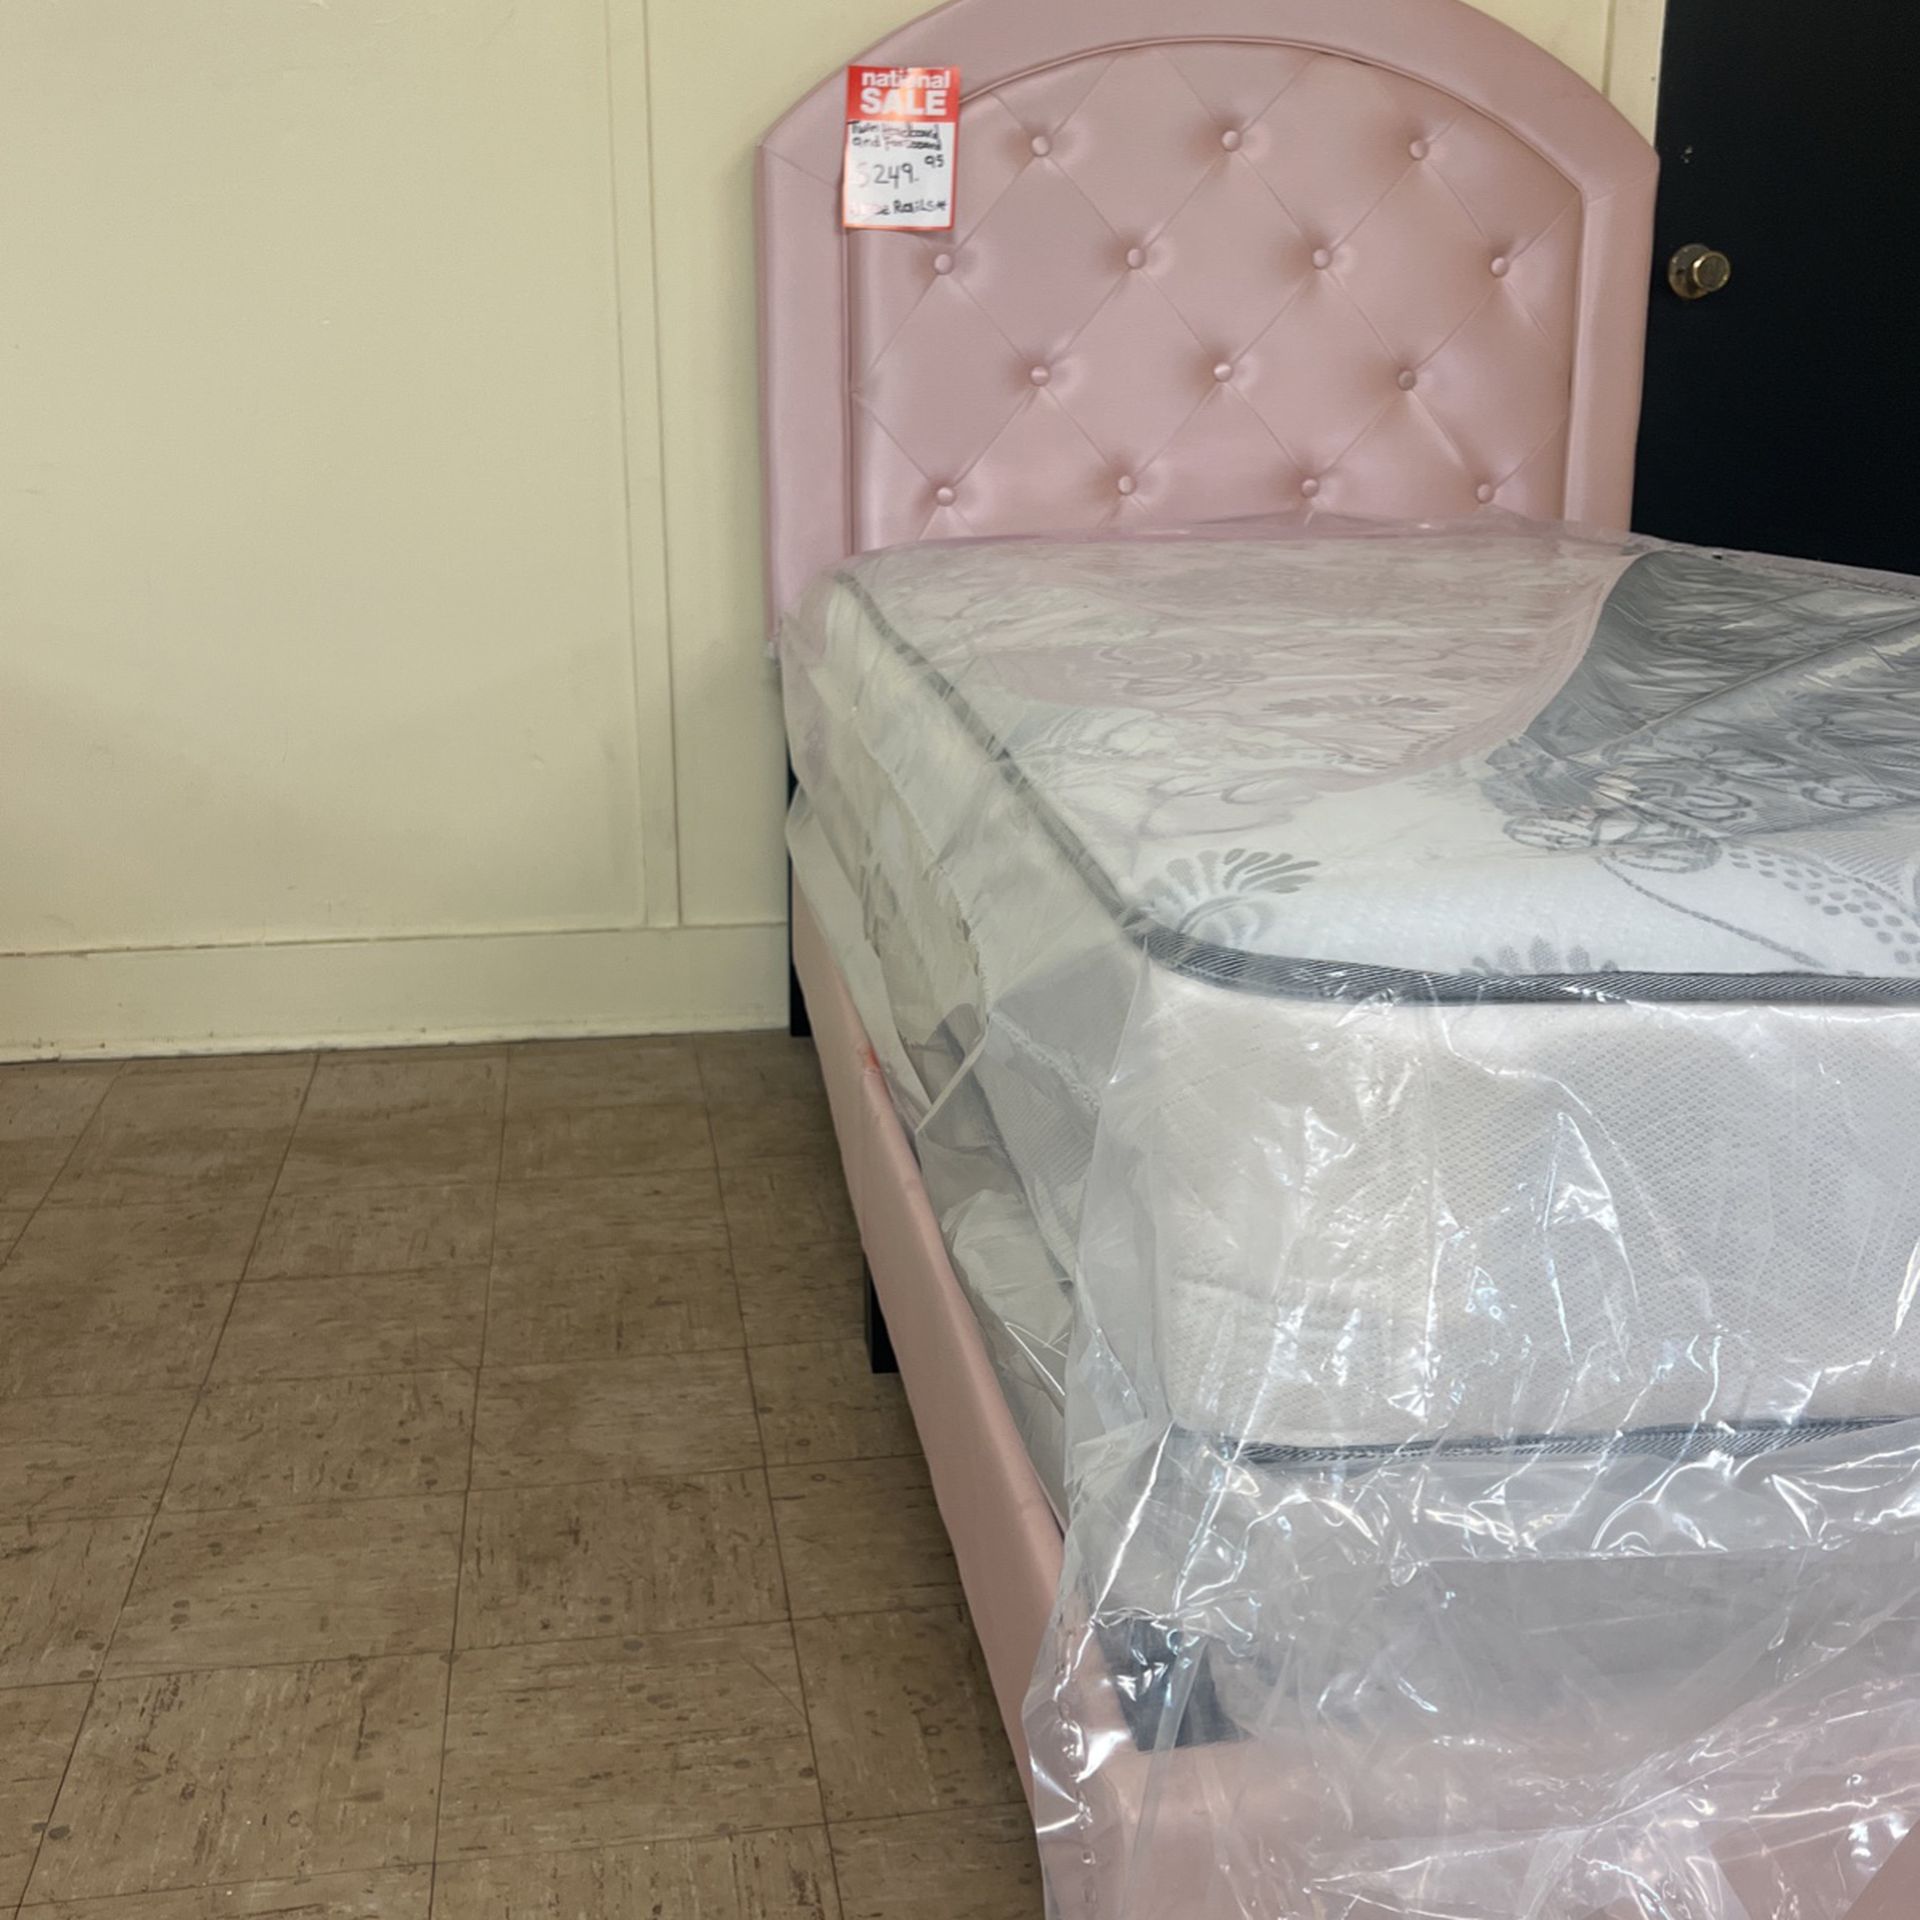 Twin size bed with mattress